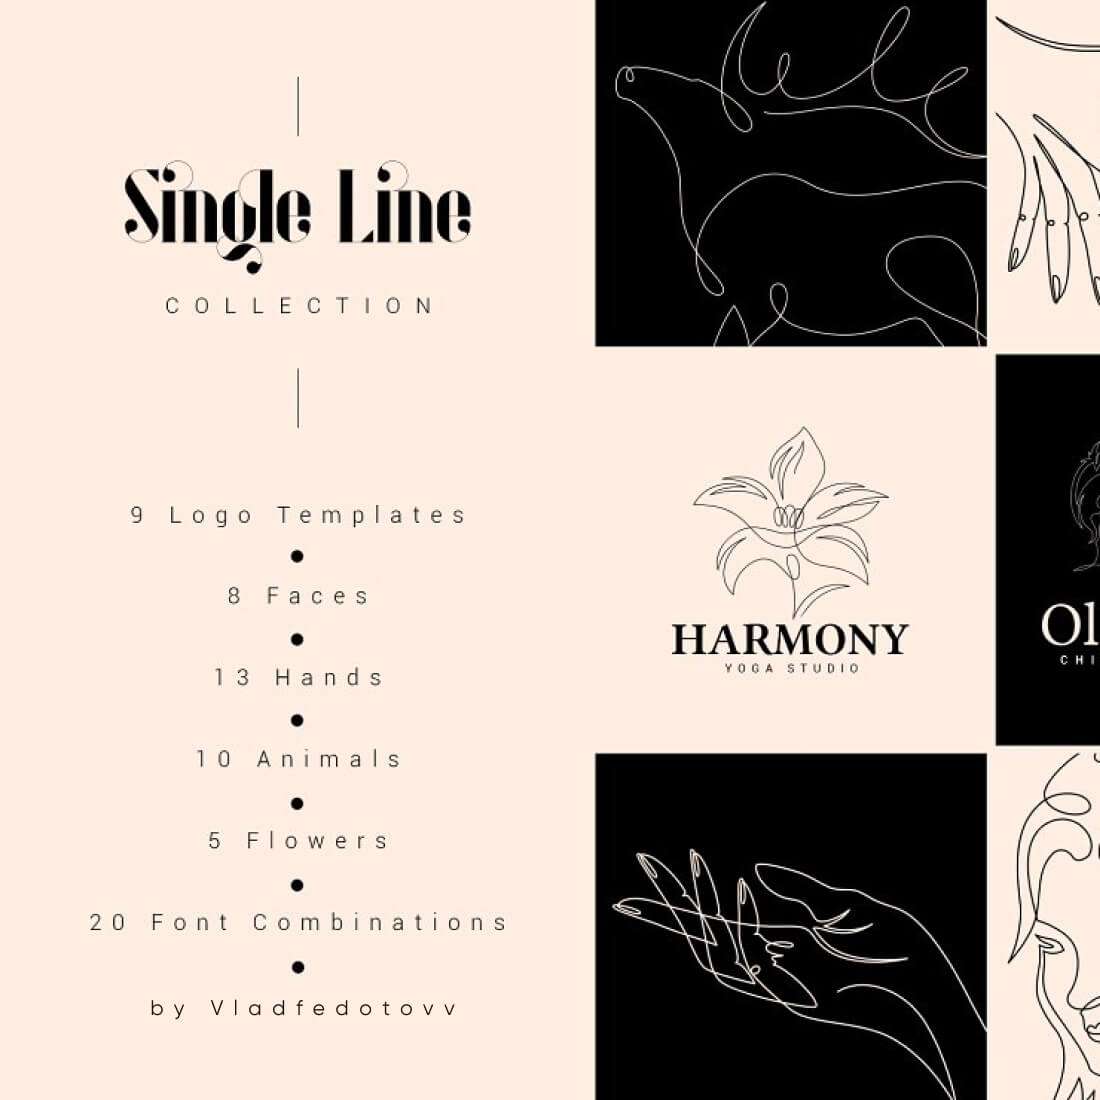 Single Line Graphic Collection 2021 cover image.